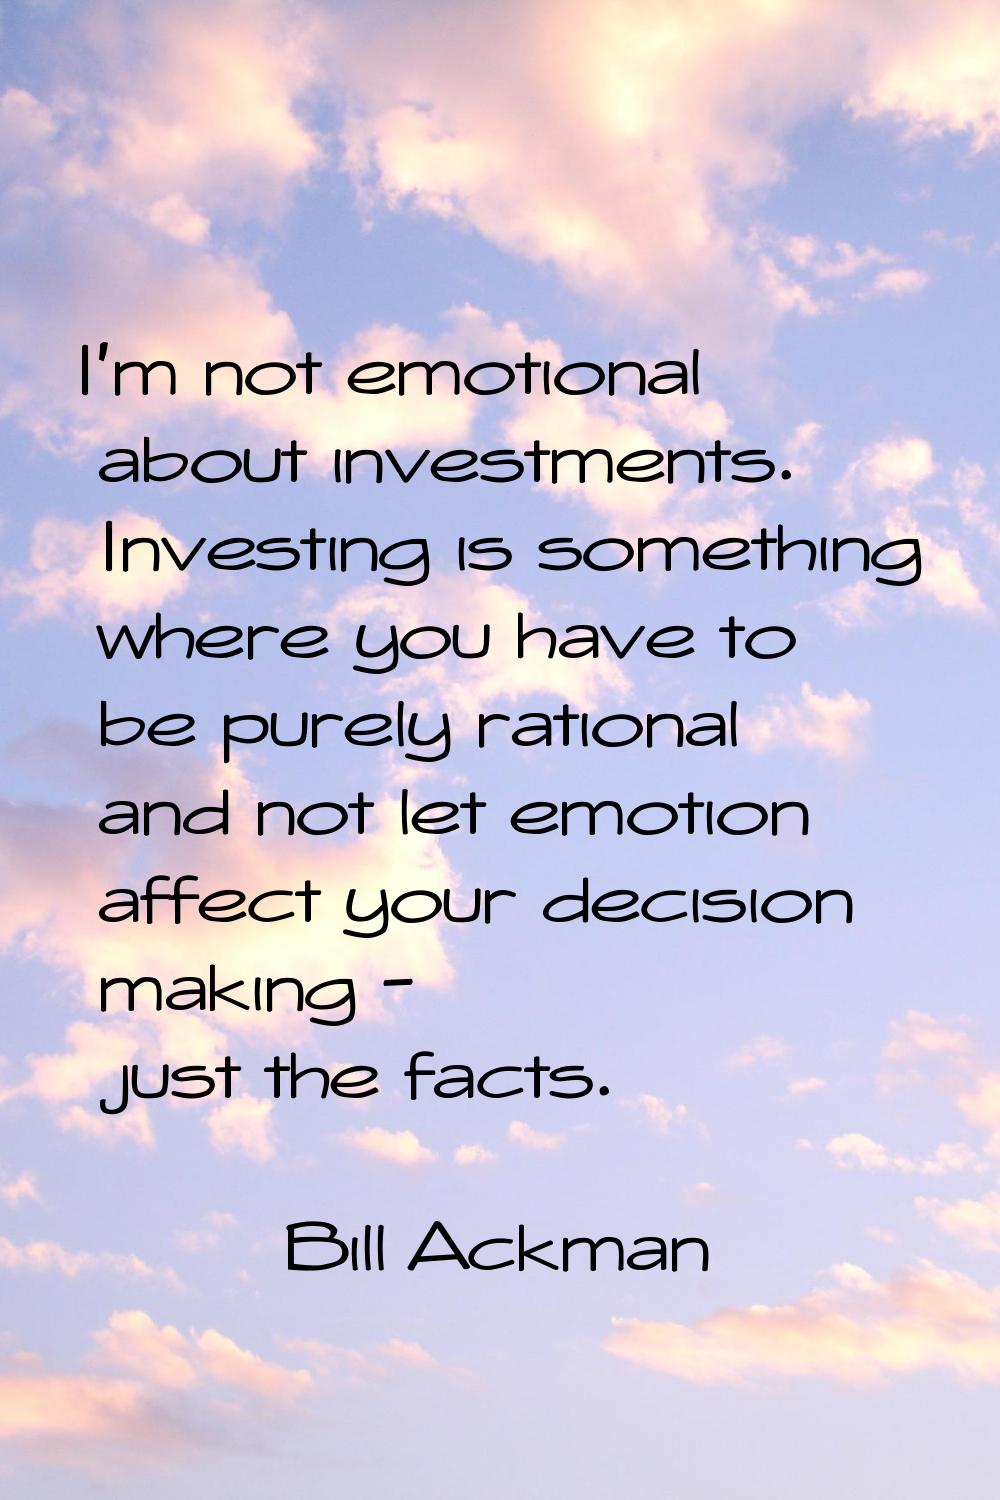 I'm not emotional about investments. Investing is something where you have to be purely rational an